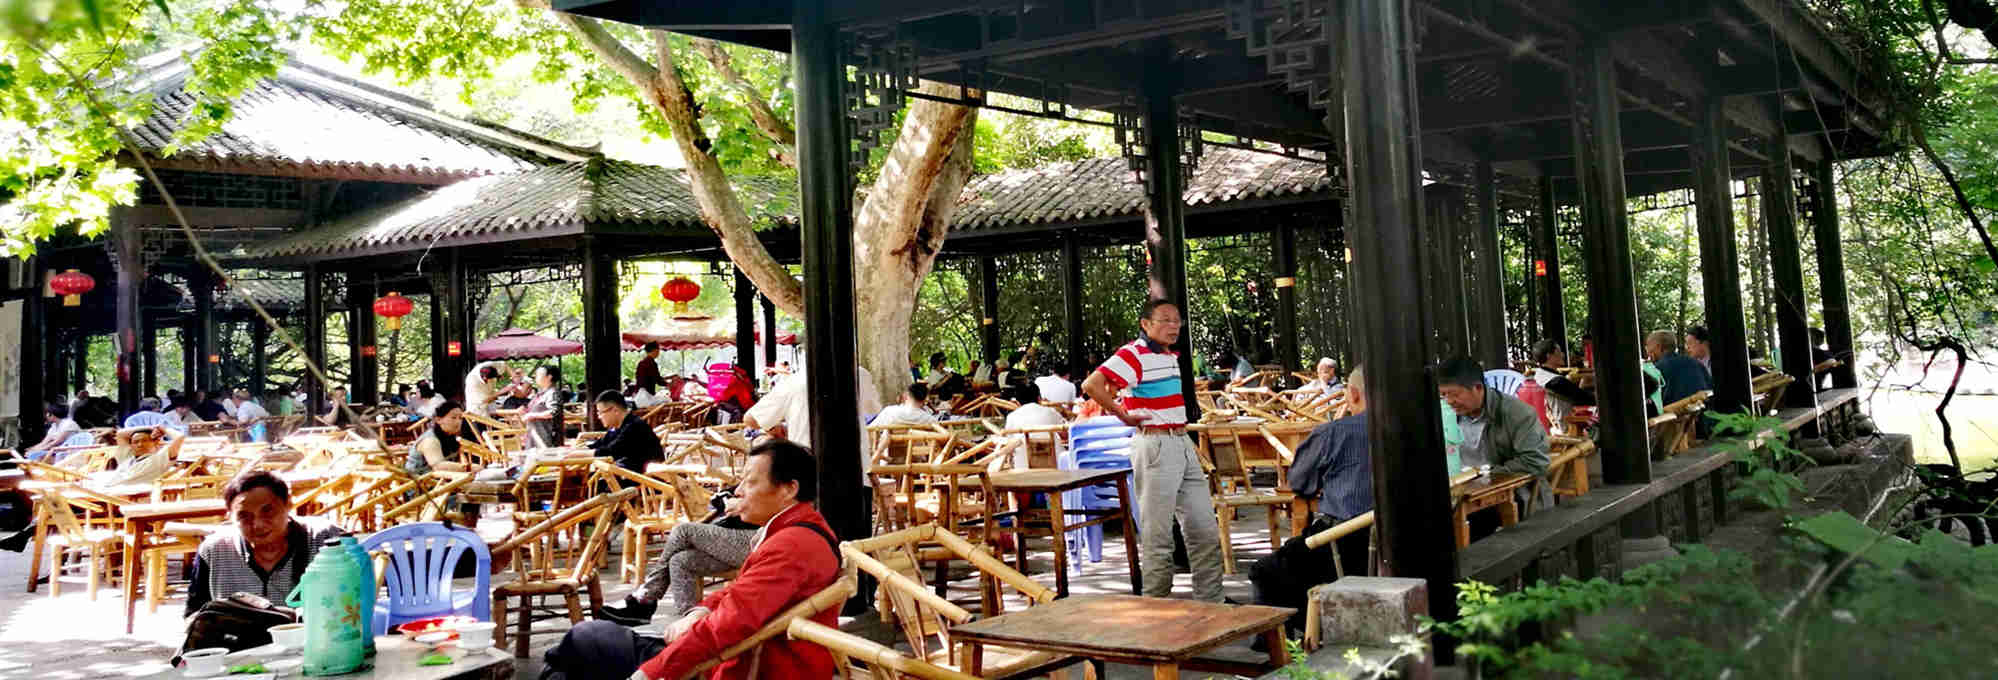 3-Hour Walking Tour in Chengdu People's Park and Learning Mahjong